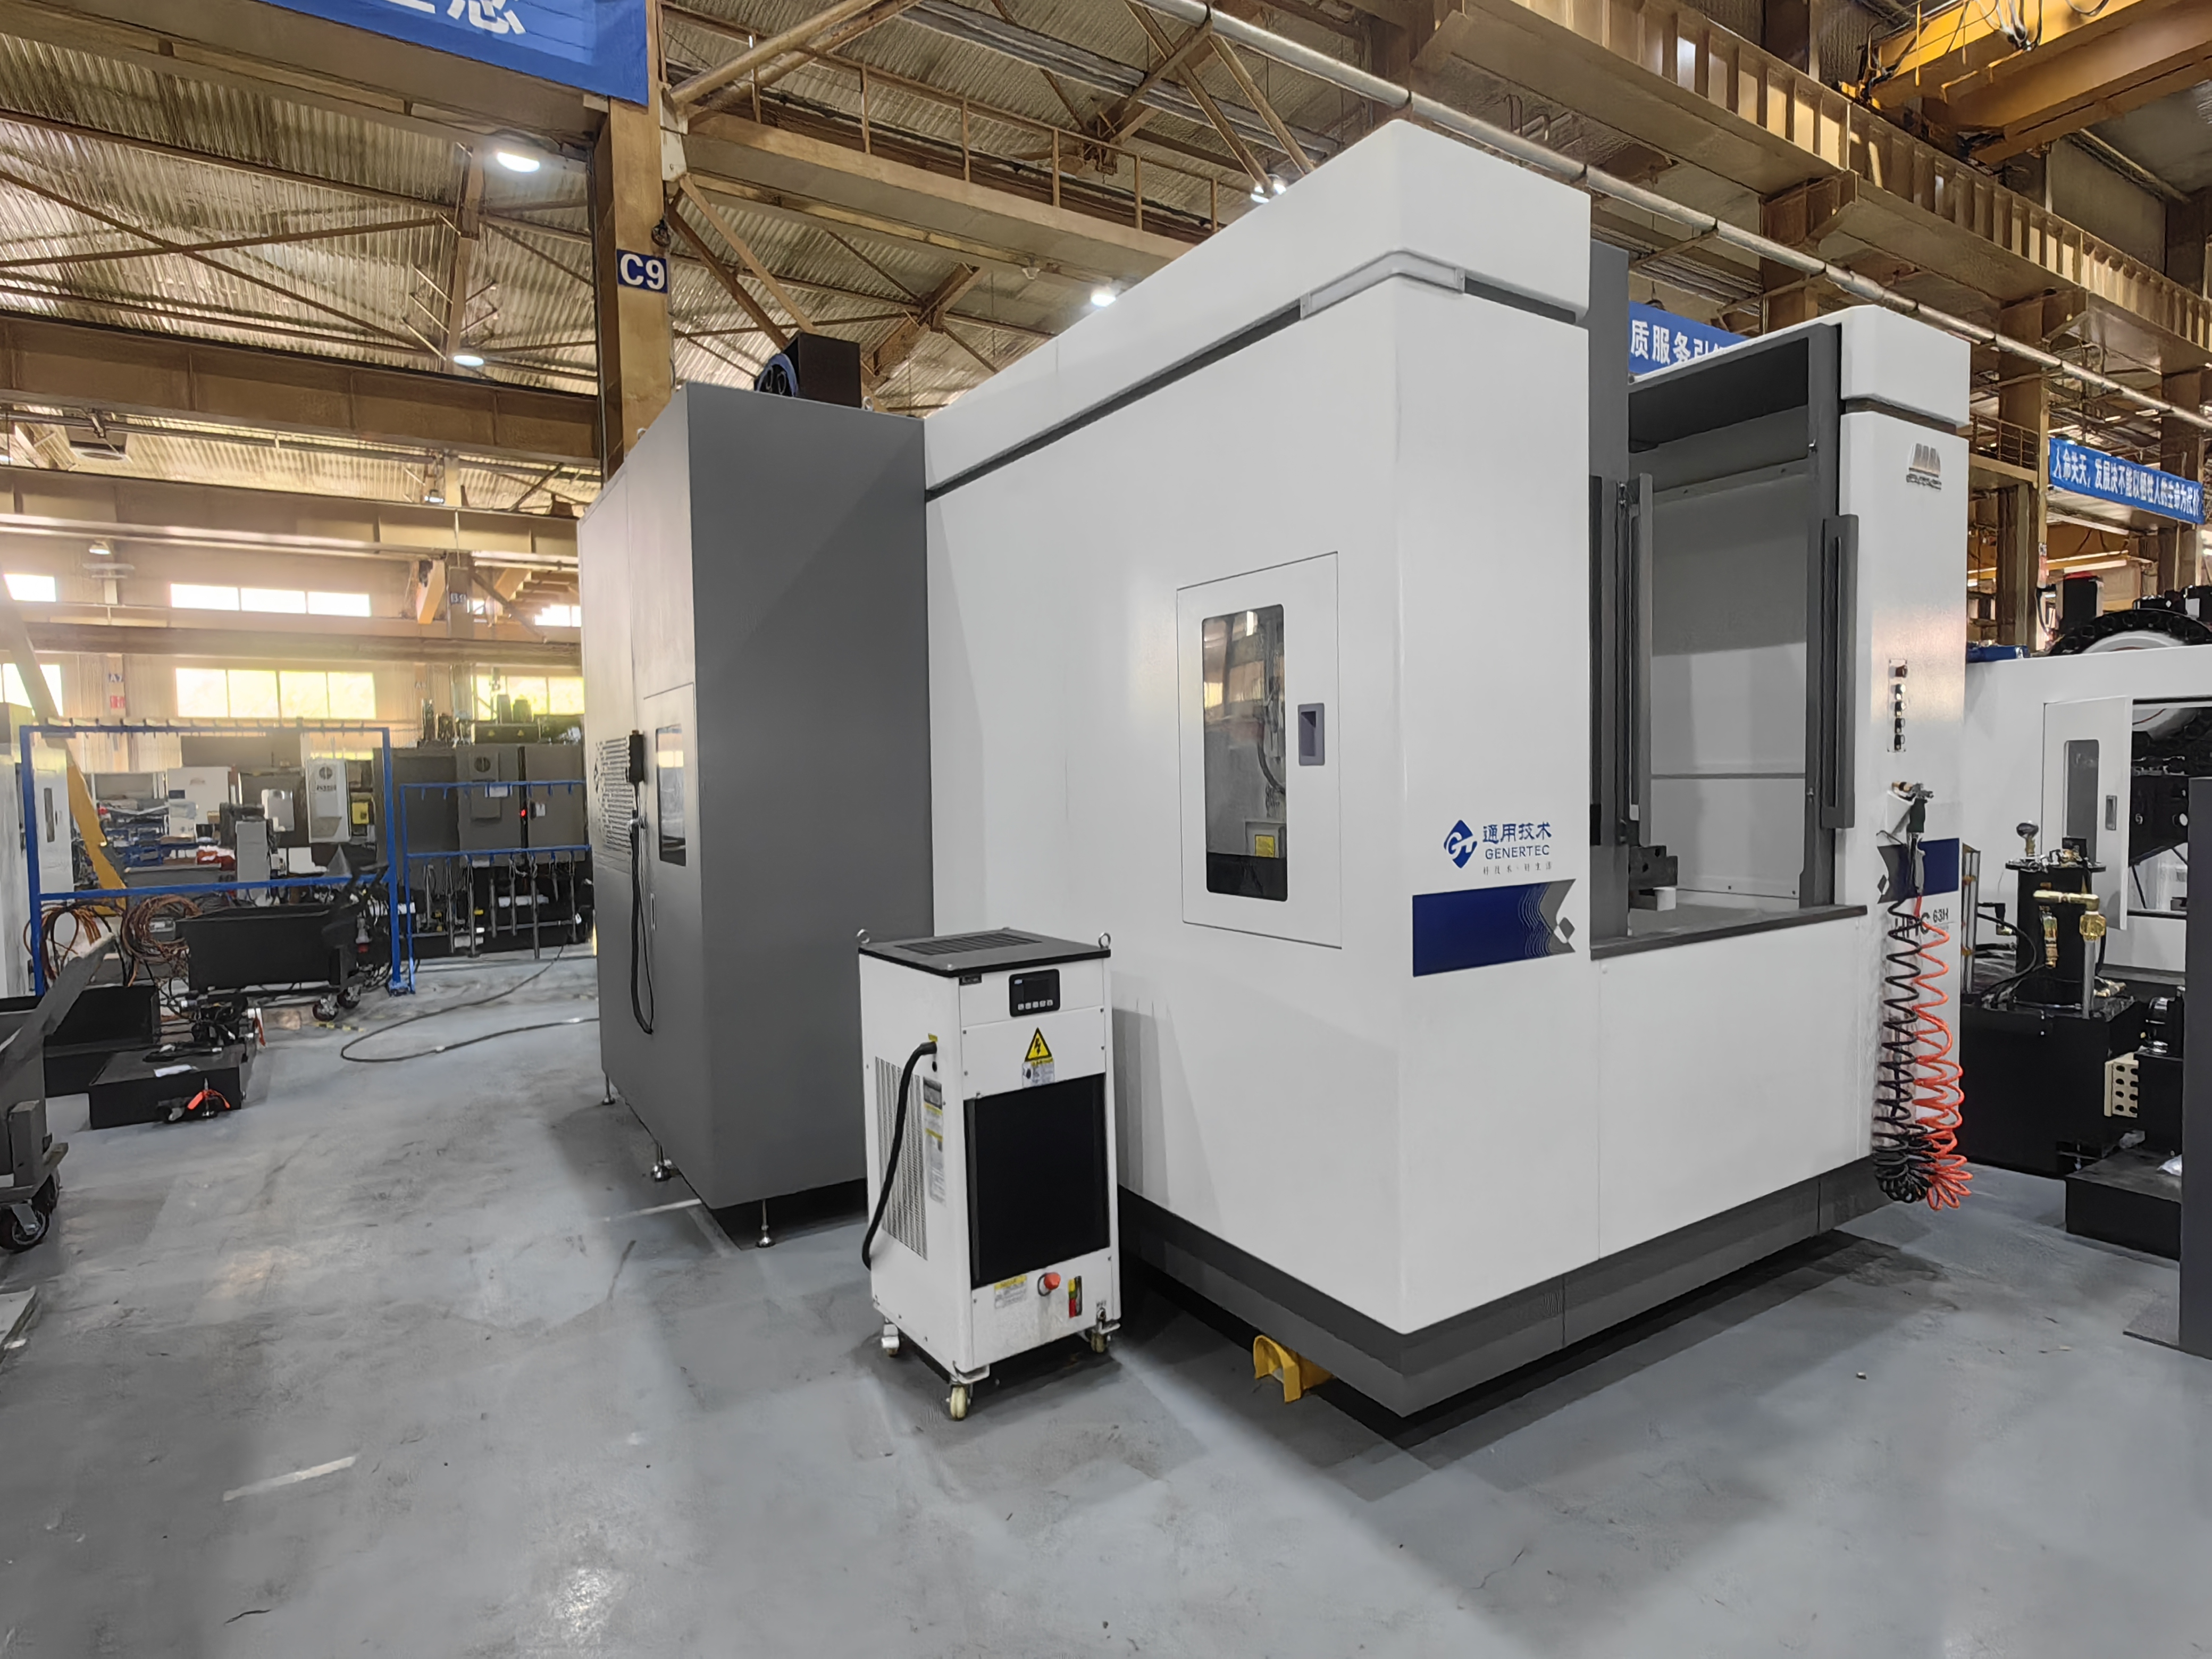 What are the maintenance points of horizontal machining center?